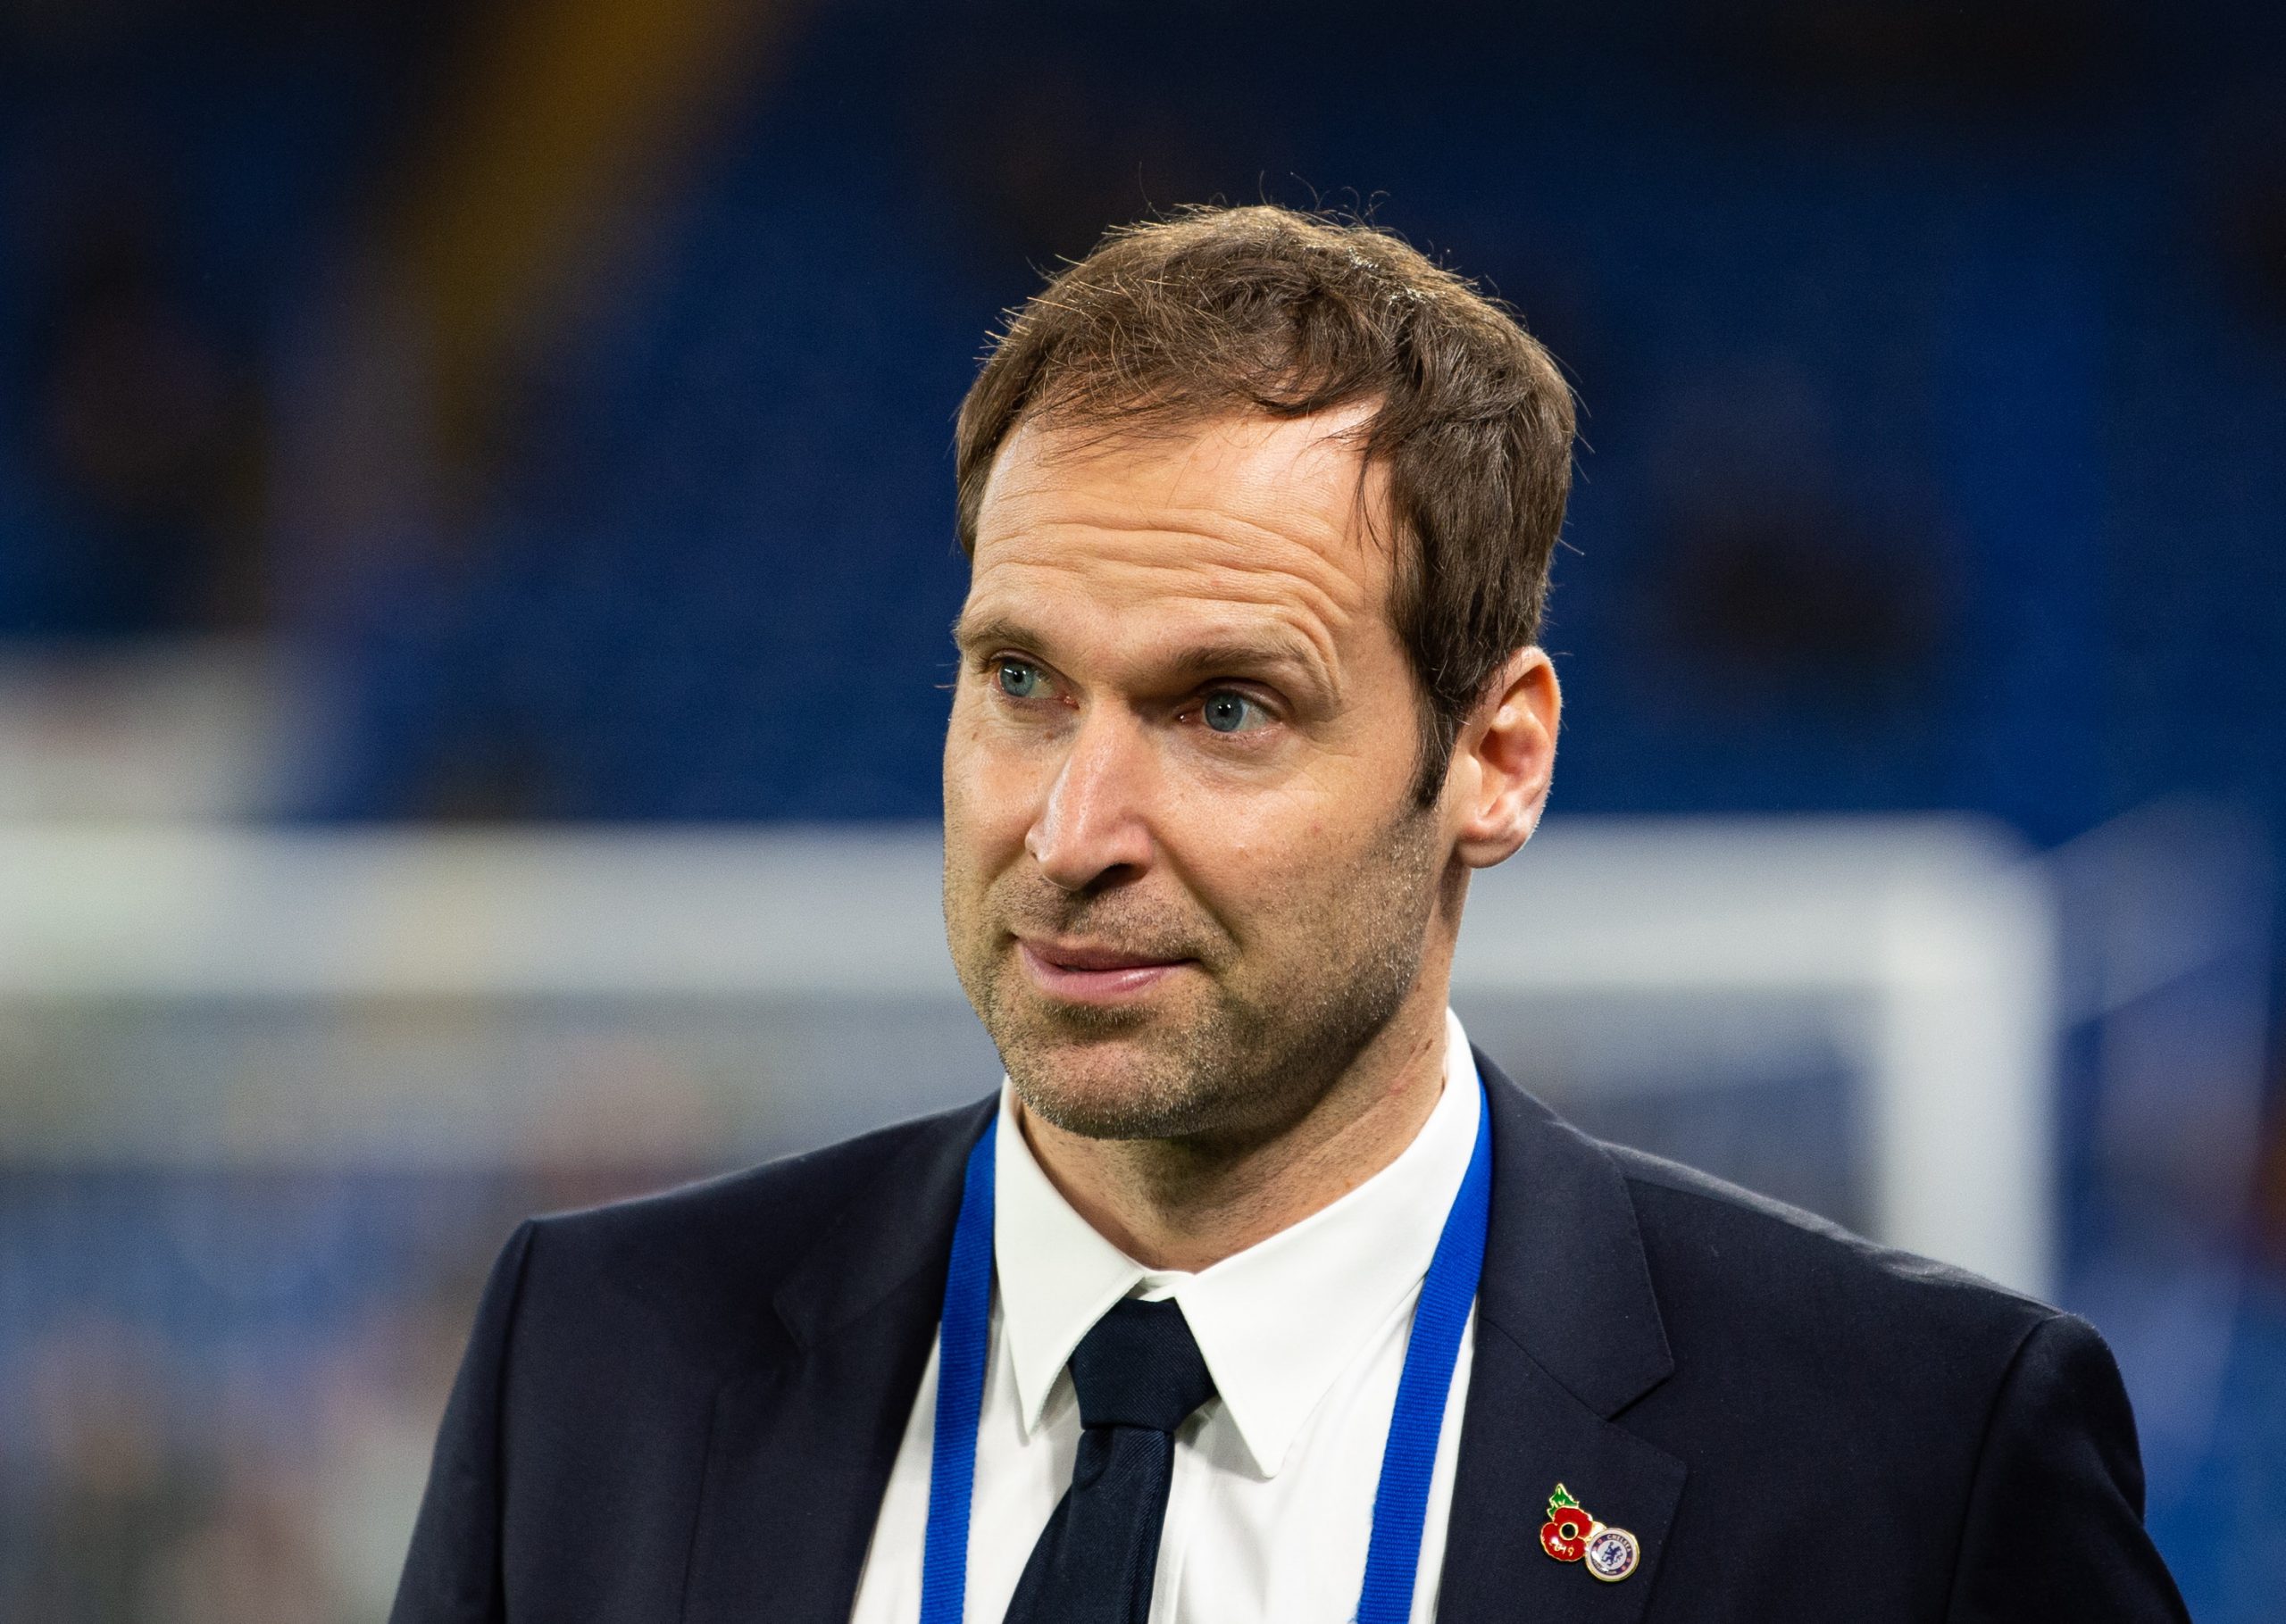 Petr Cech before the UEFA Champions League group match between Chelsea and Ajax at Stamford Bridge, London, England on 5